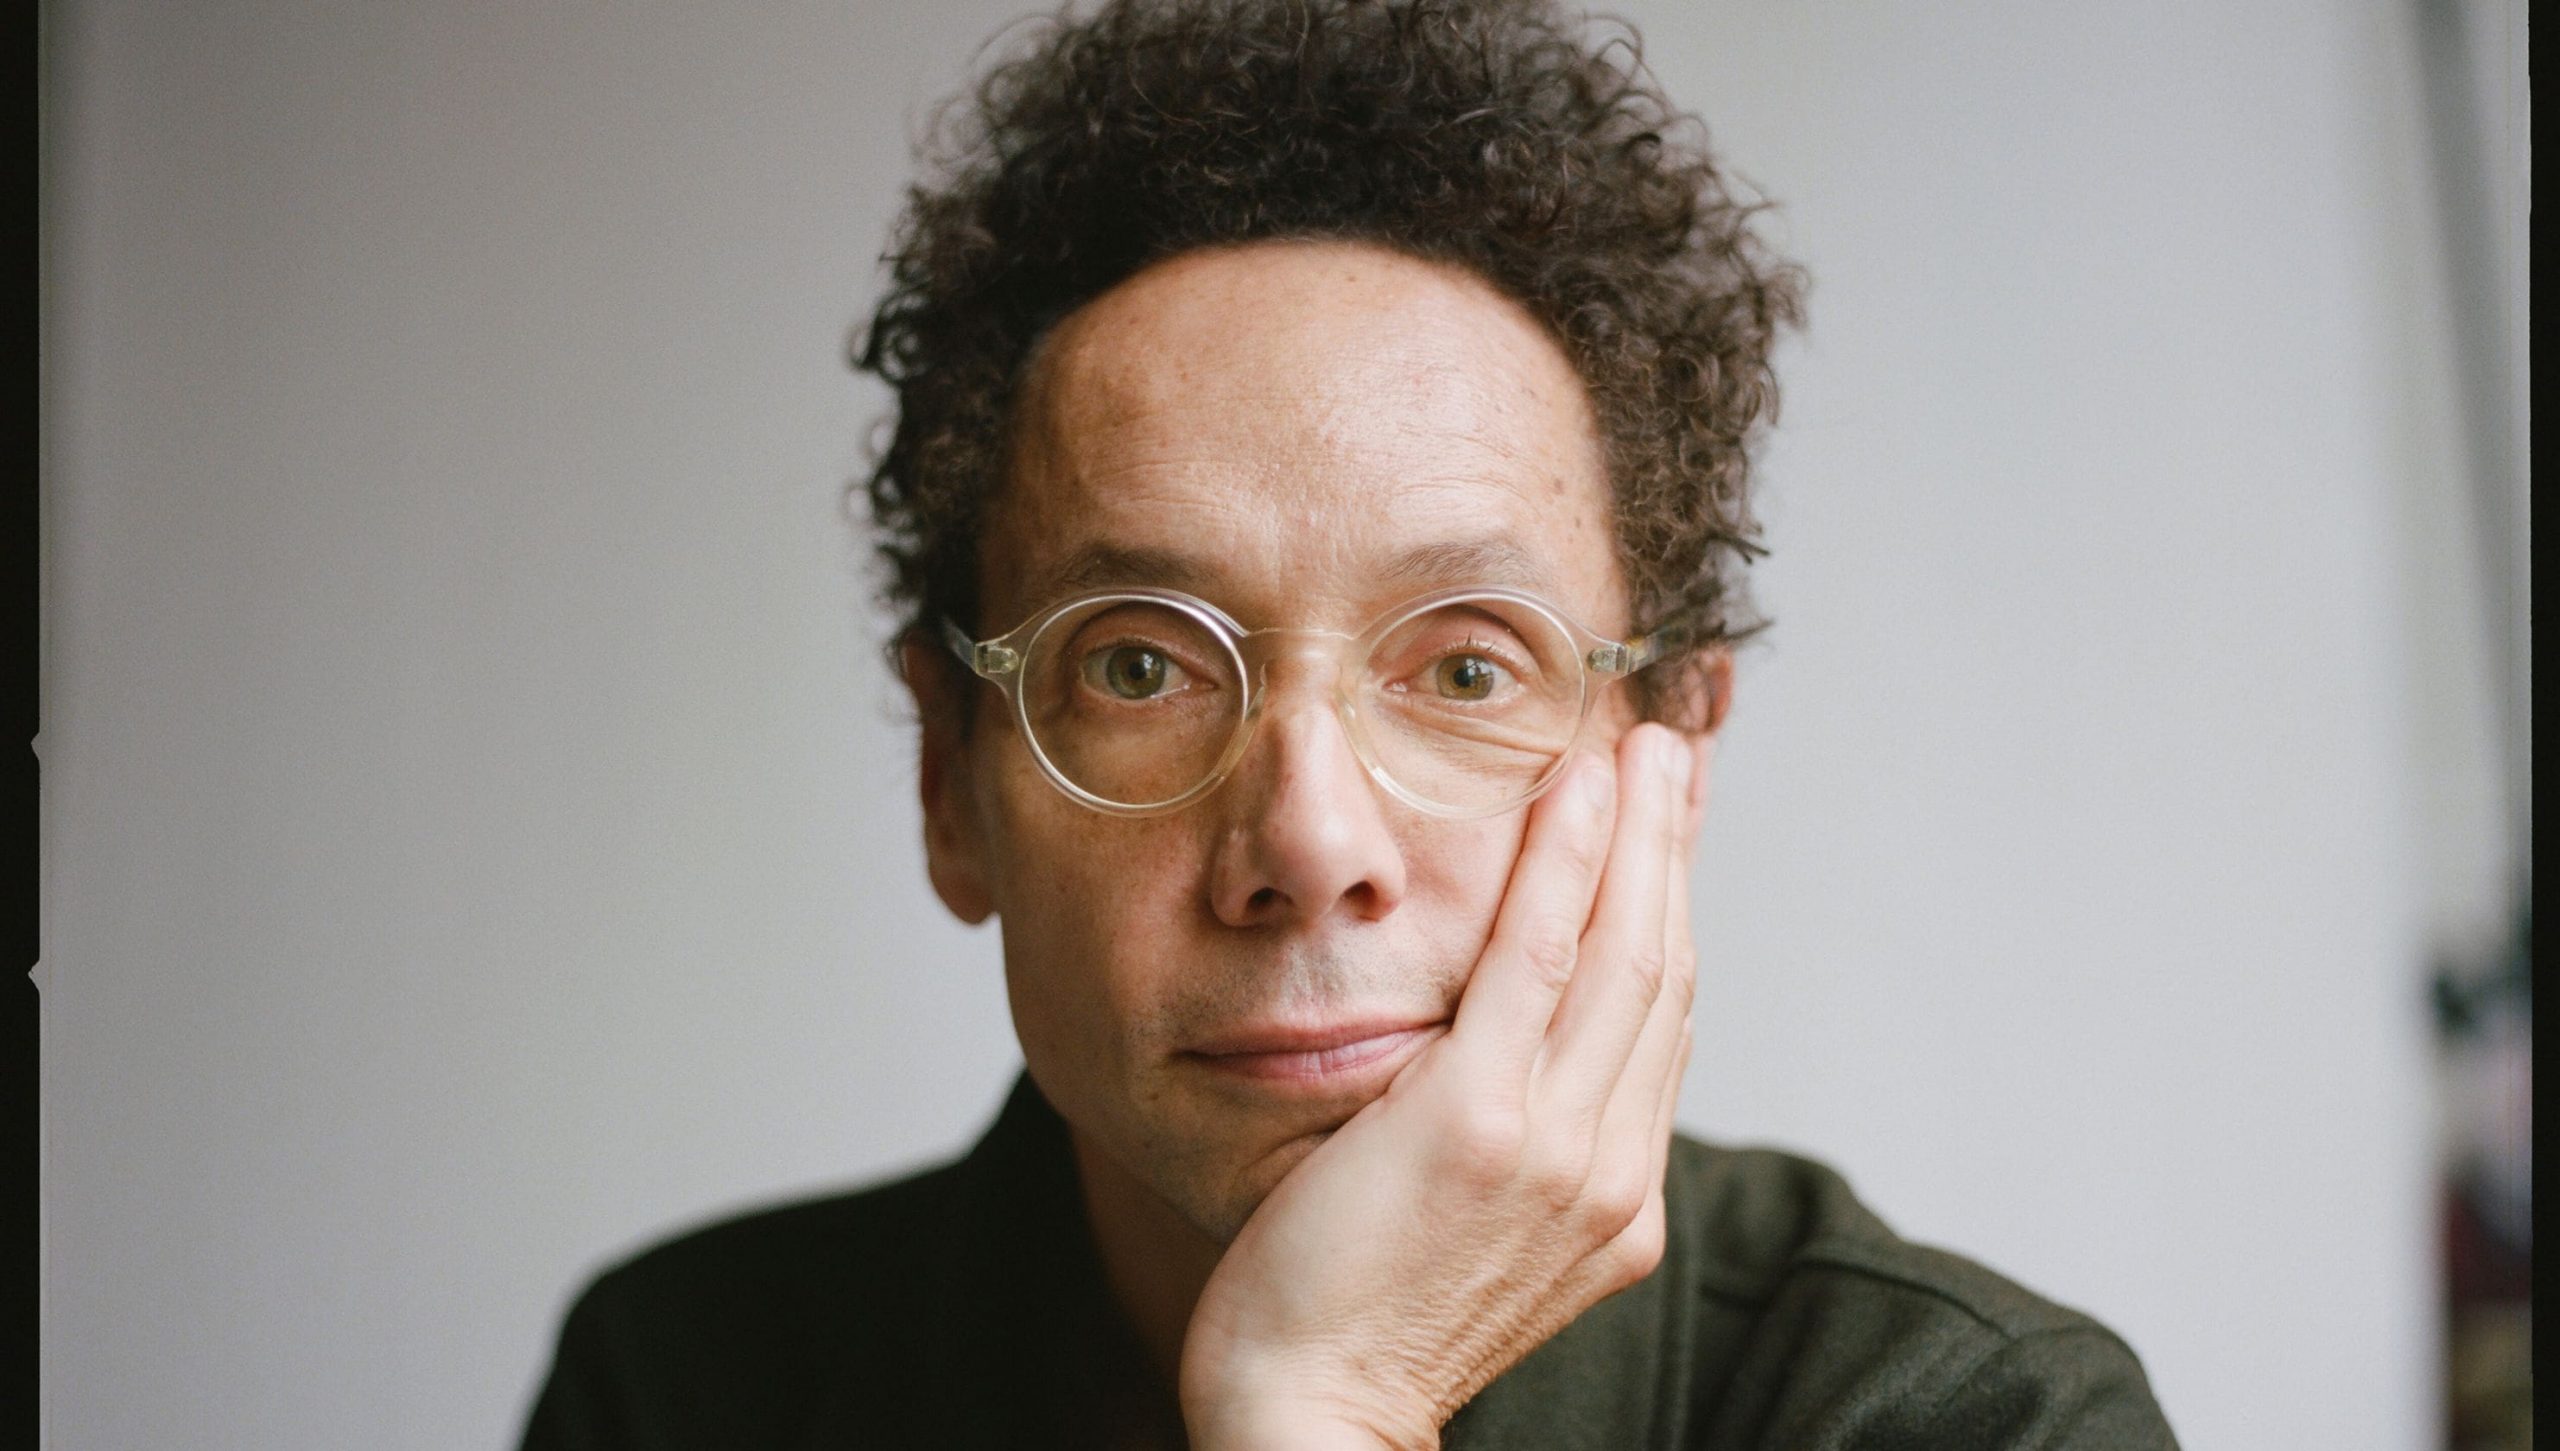 Who is Malcolm Gladwell?